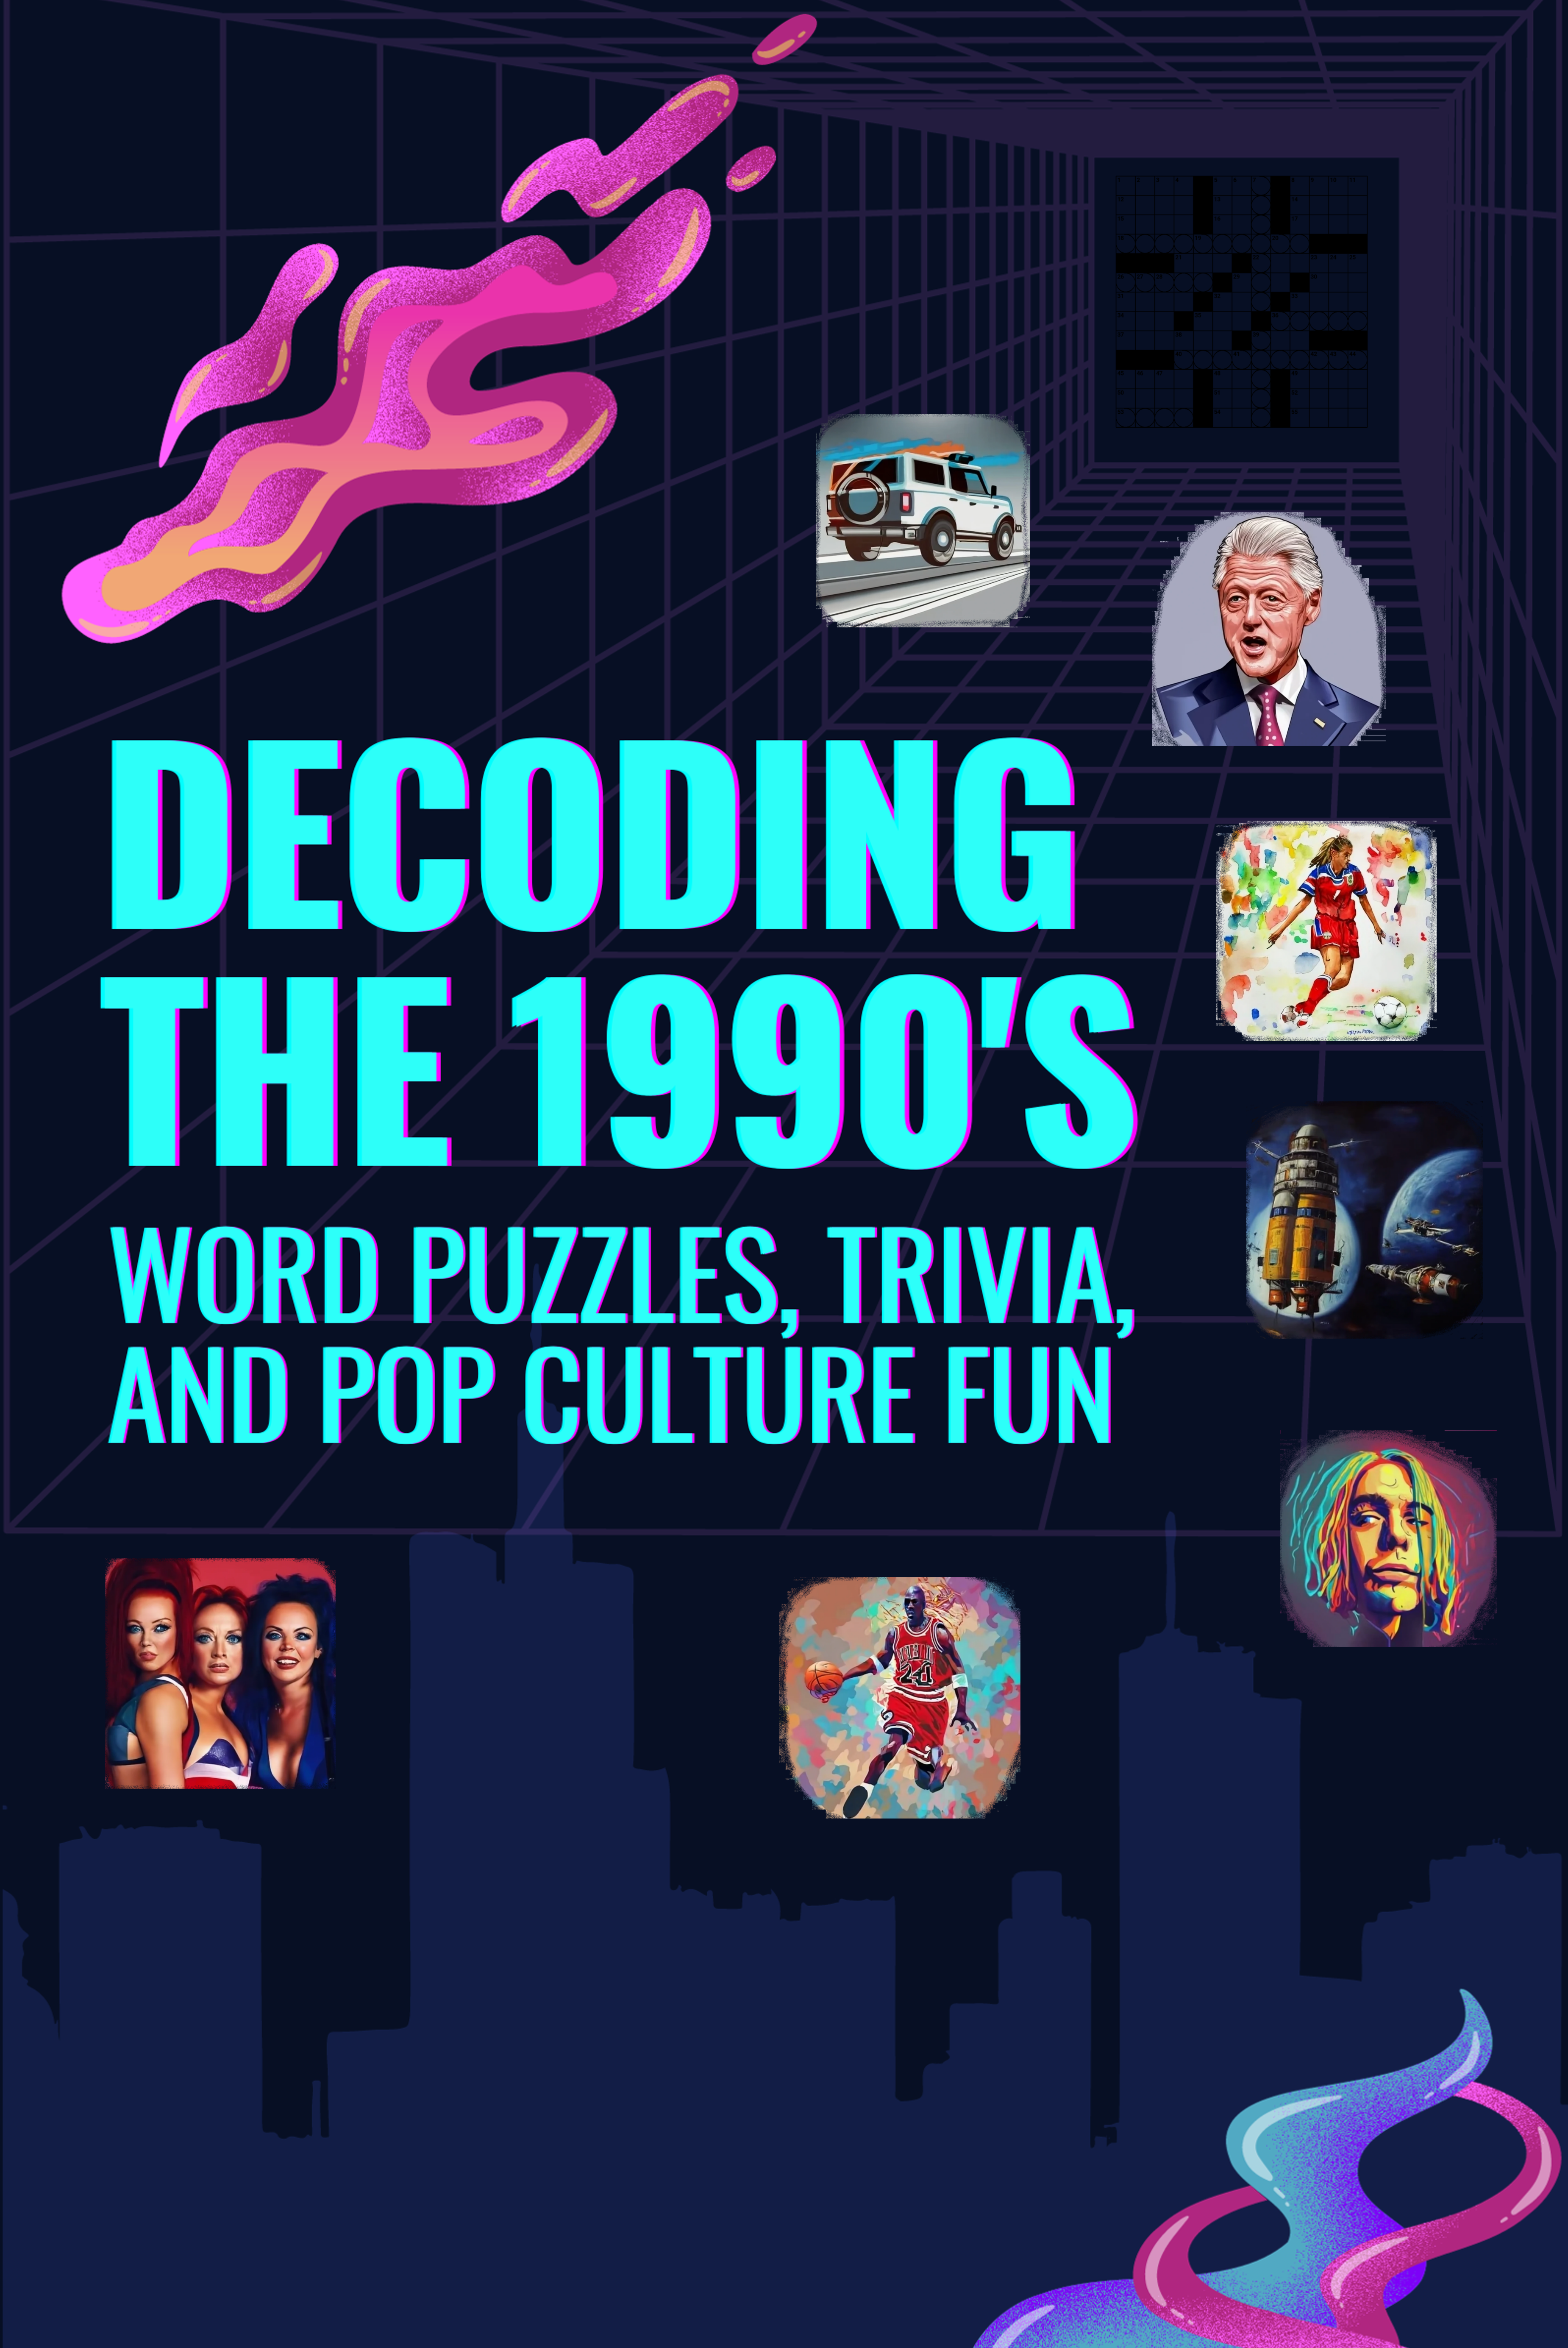 Decoding the 1990s: Word Puzzles, Trivia, and Pop Culture